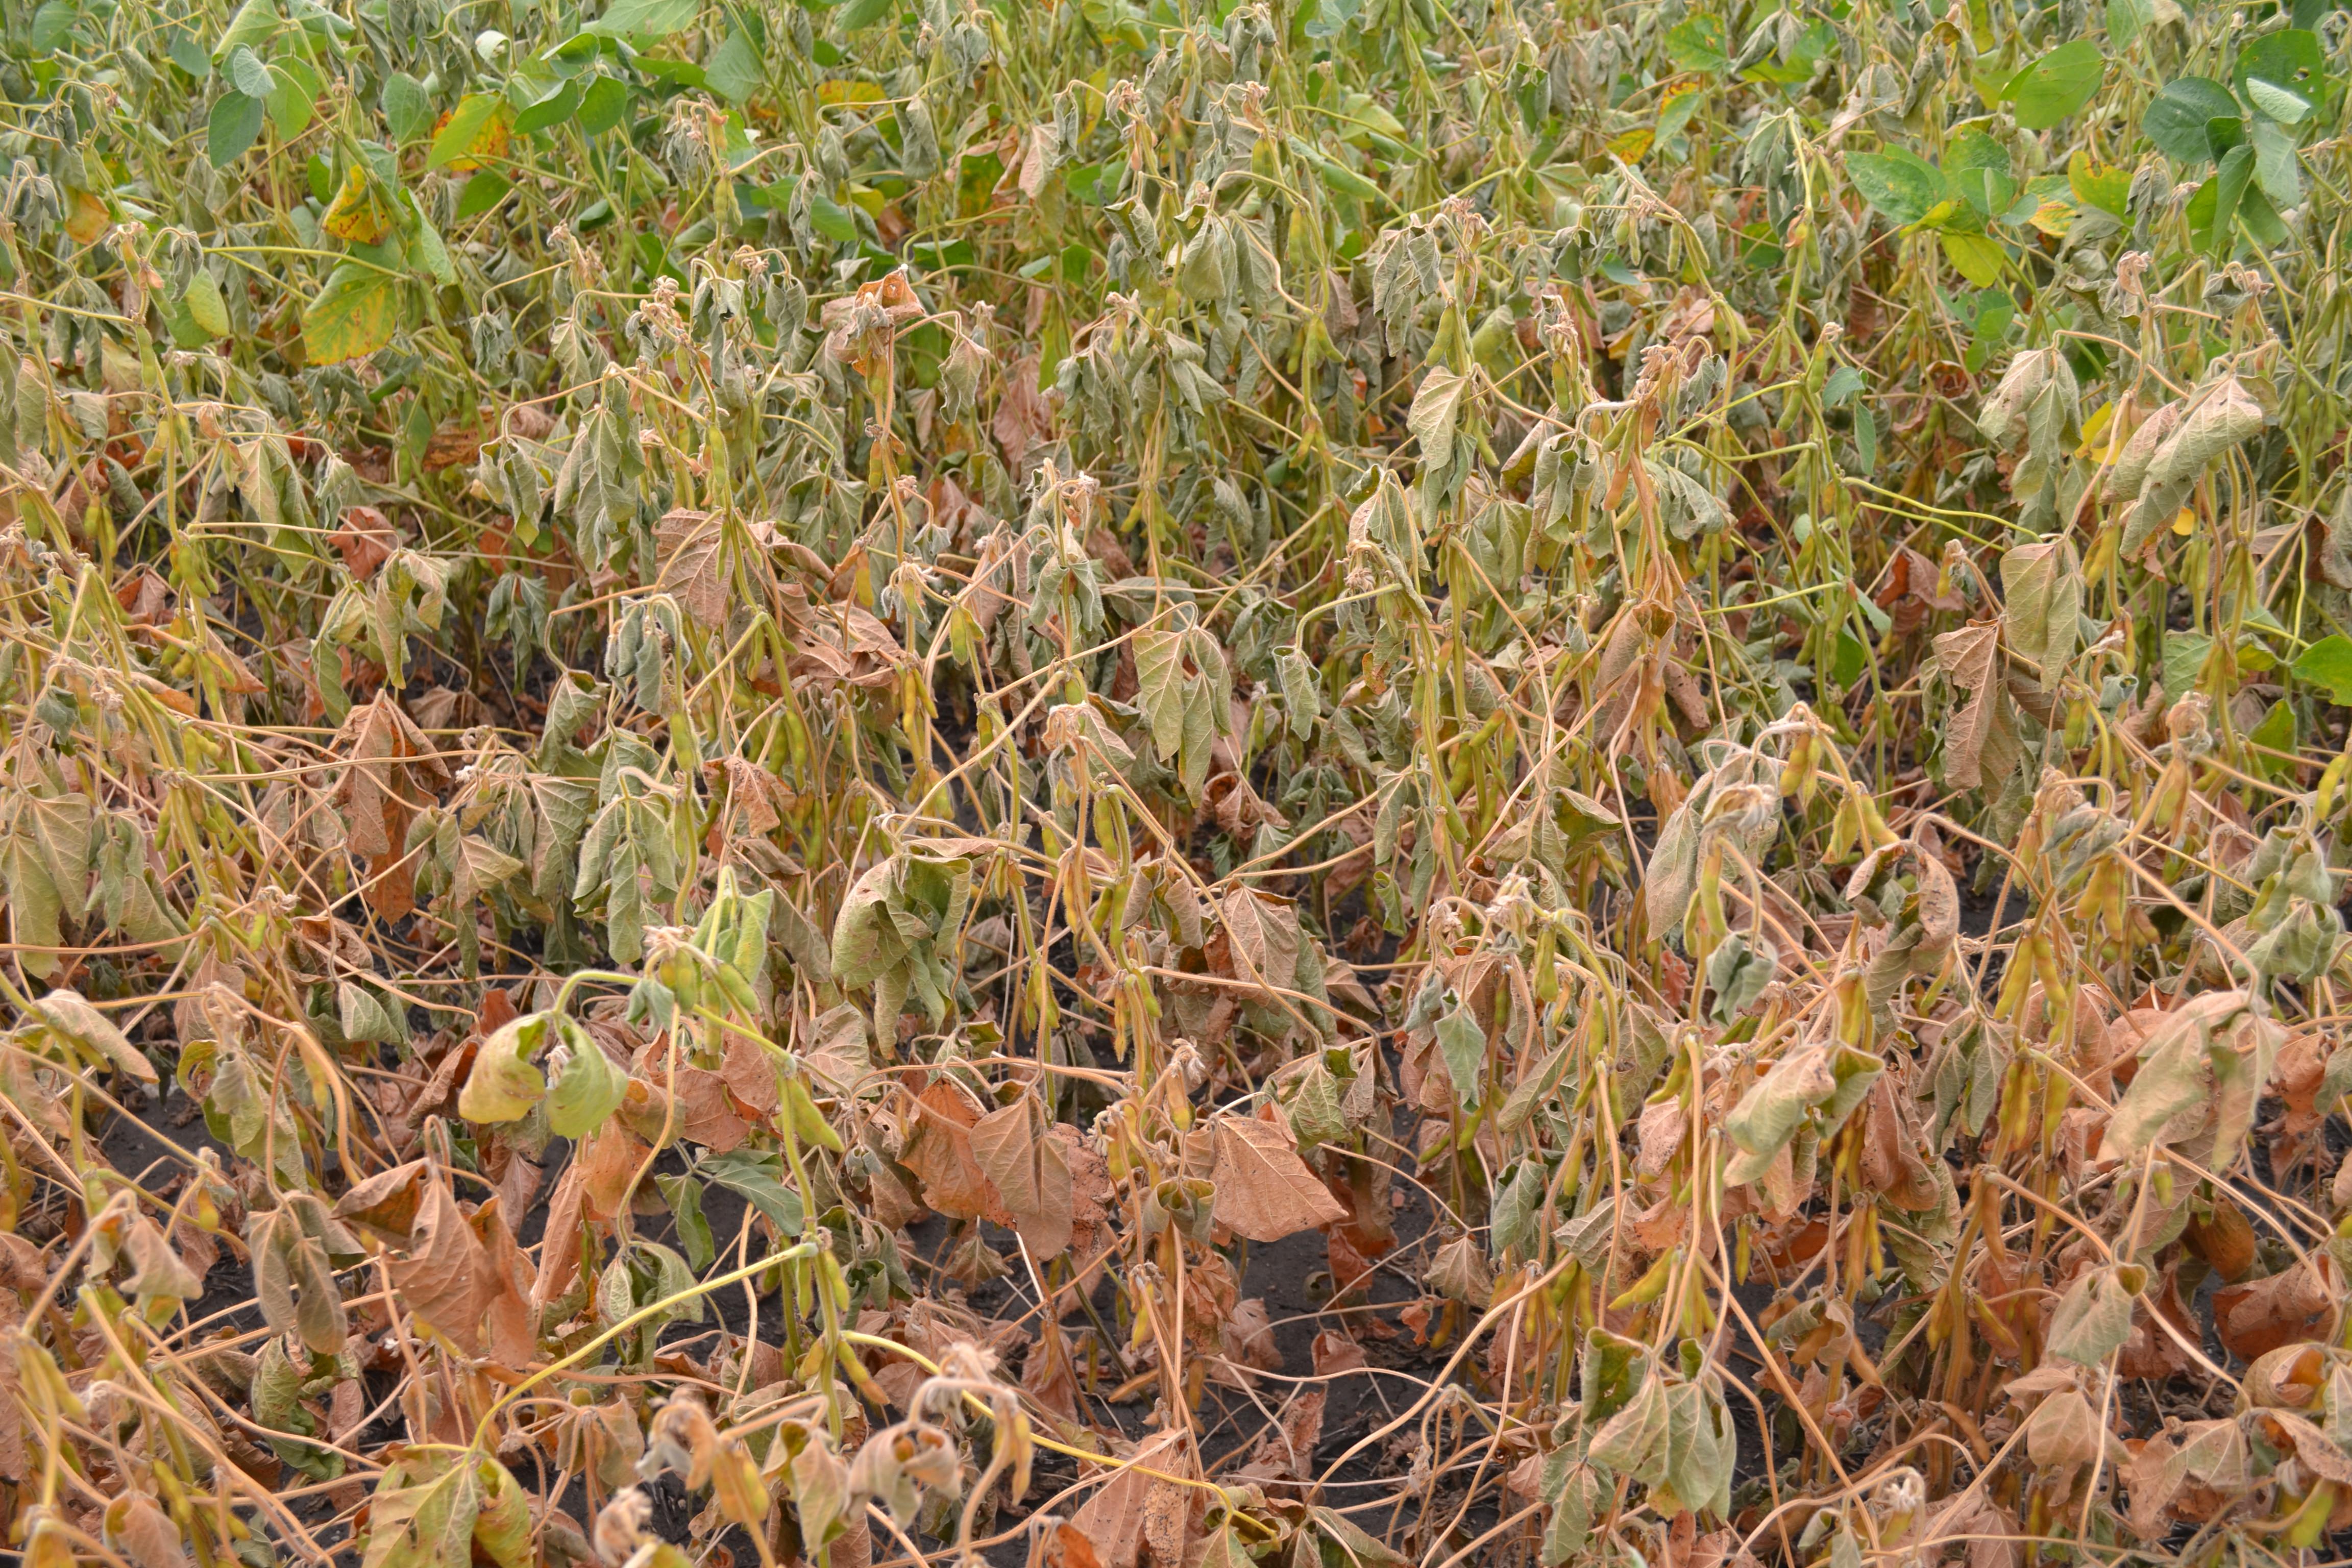 Soybean plants with wilted leaves many have turned tan or brown.